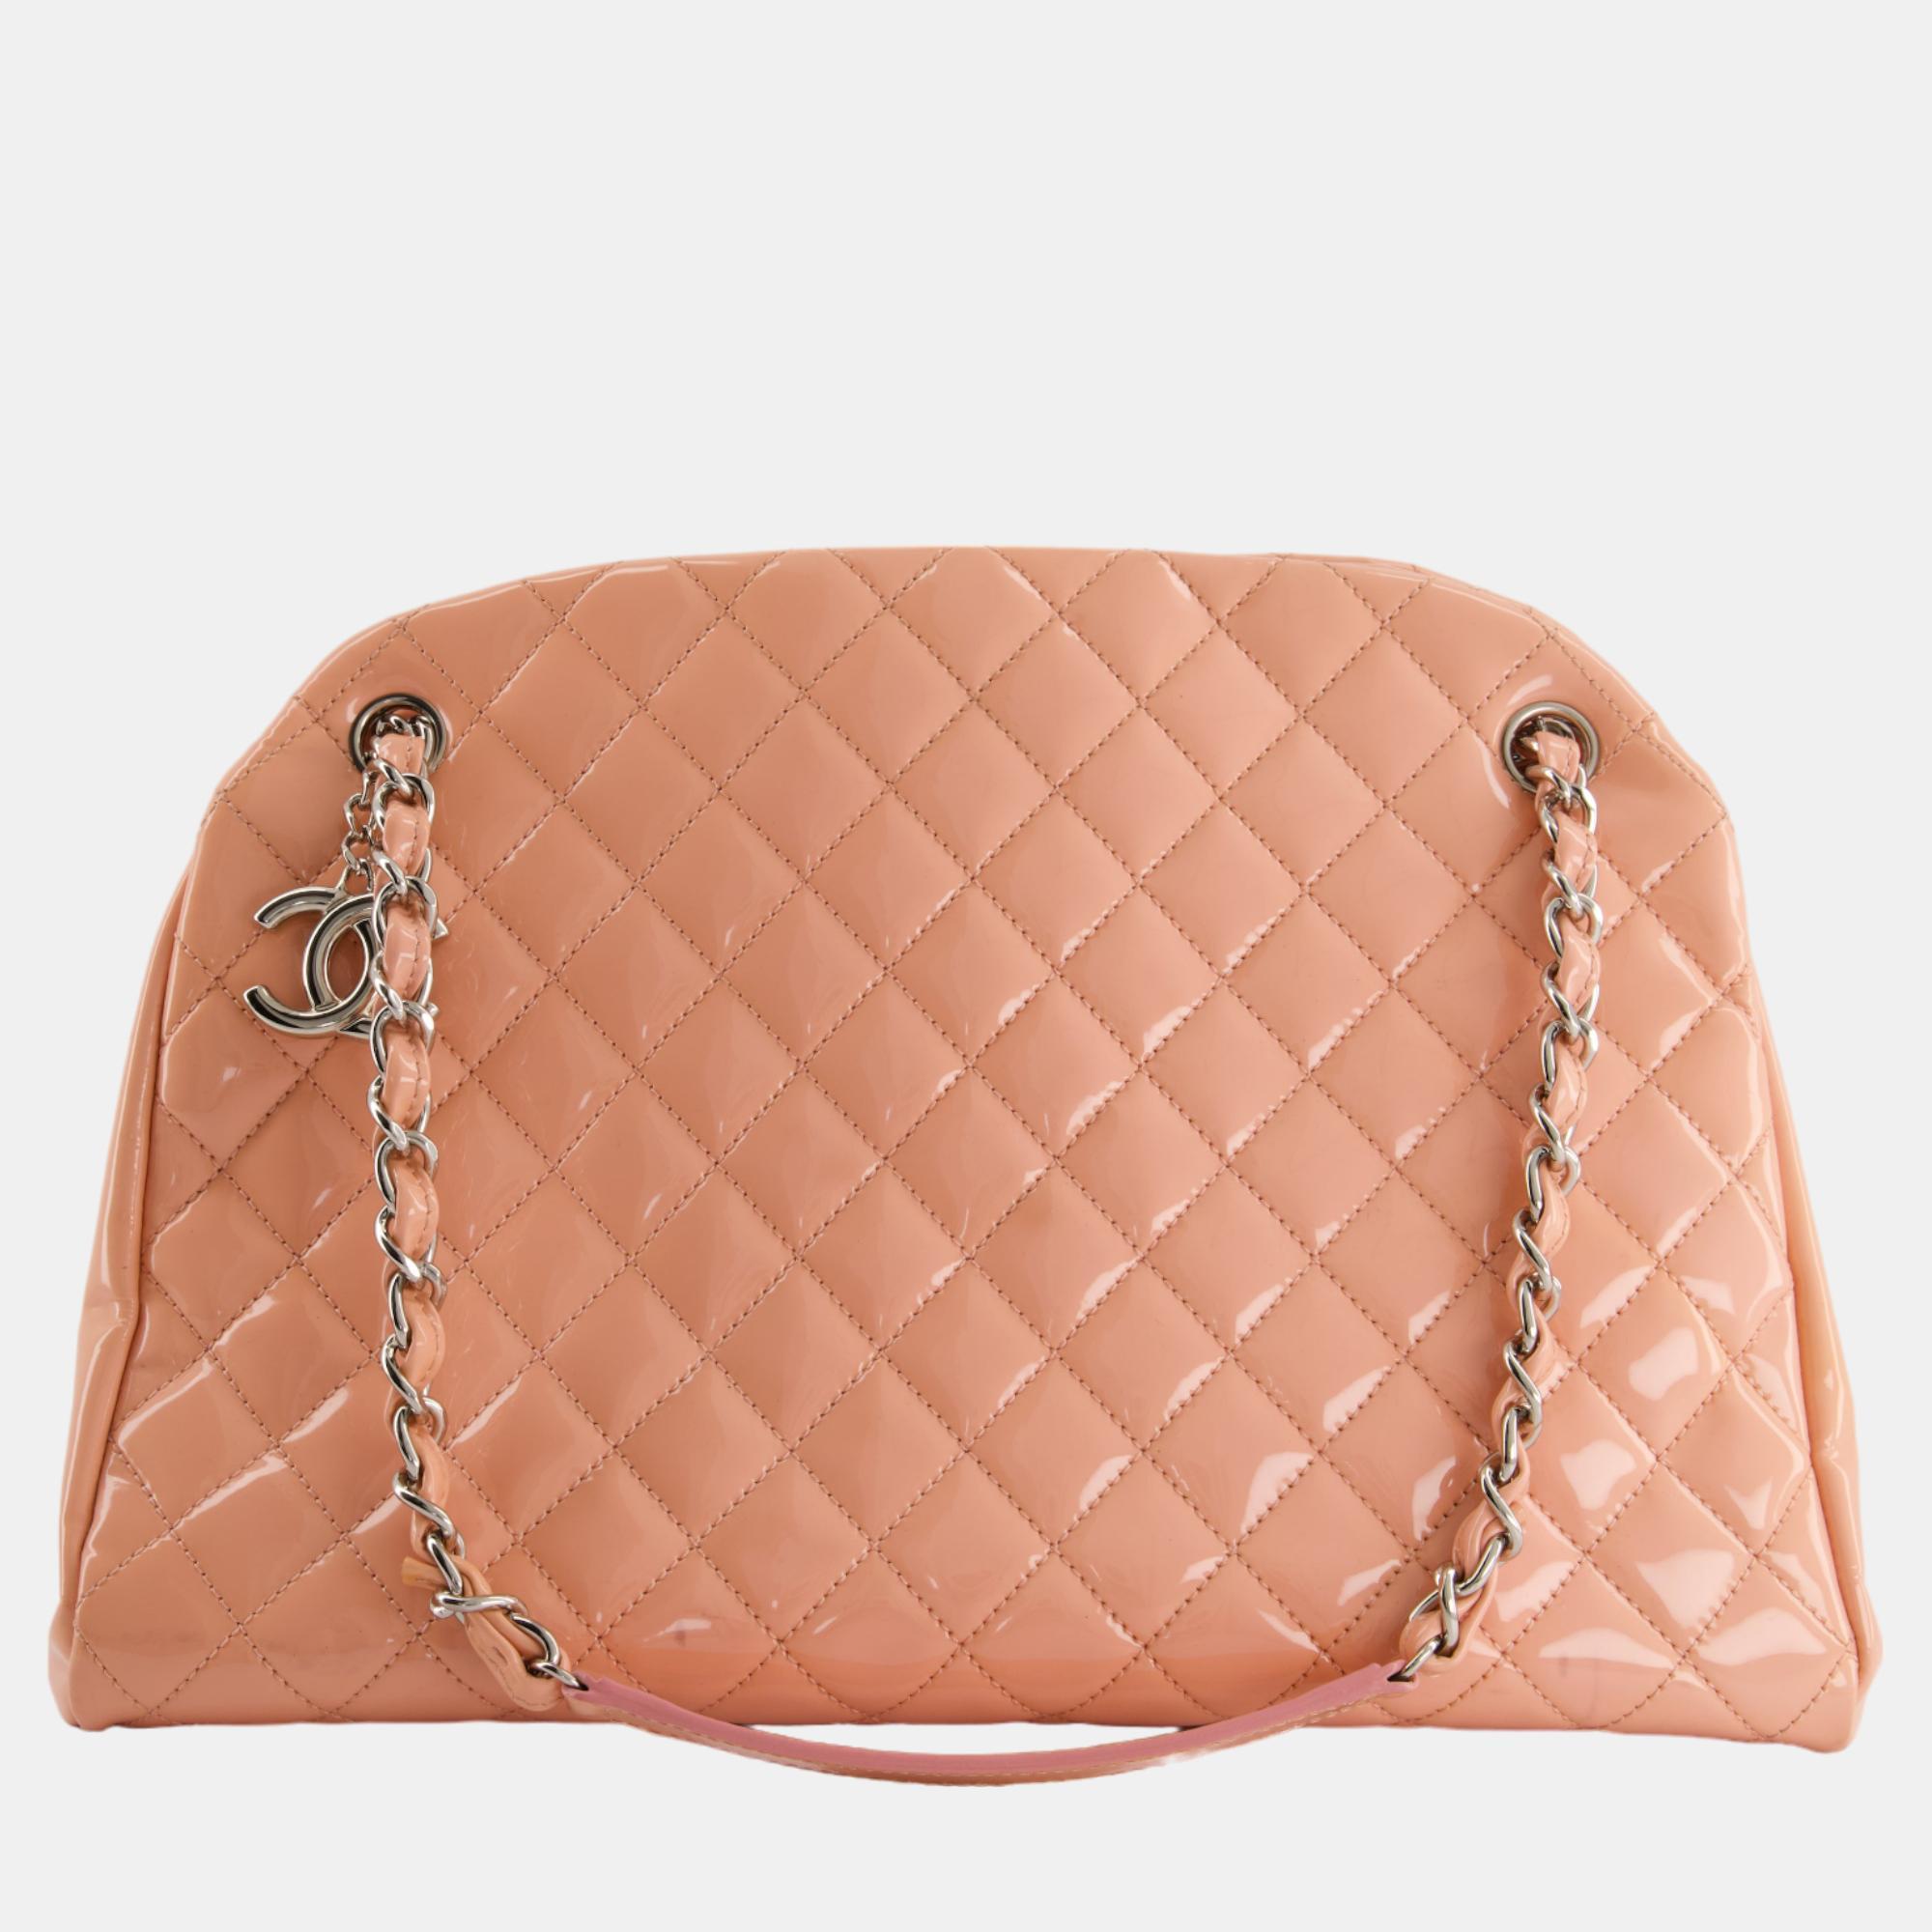 Chanel pink patent mademoiselle shoulder bag with silver hardware